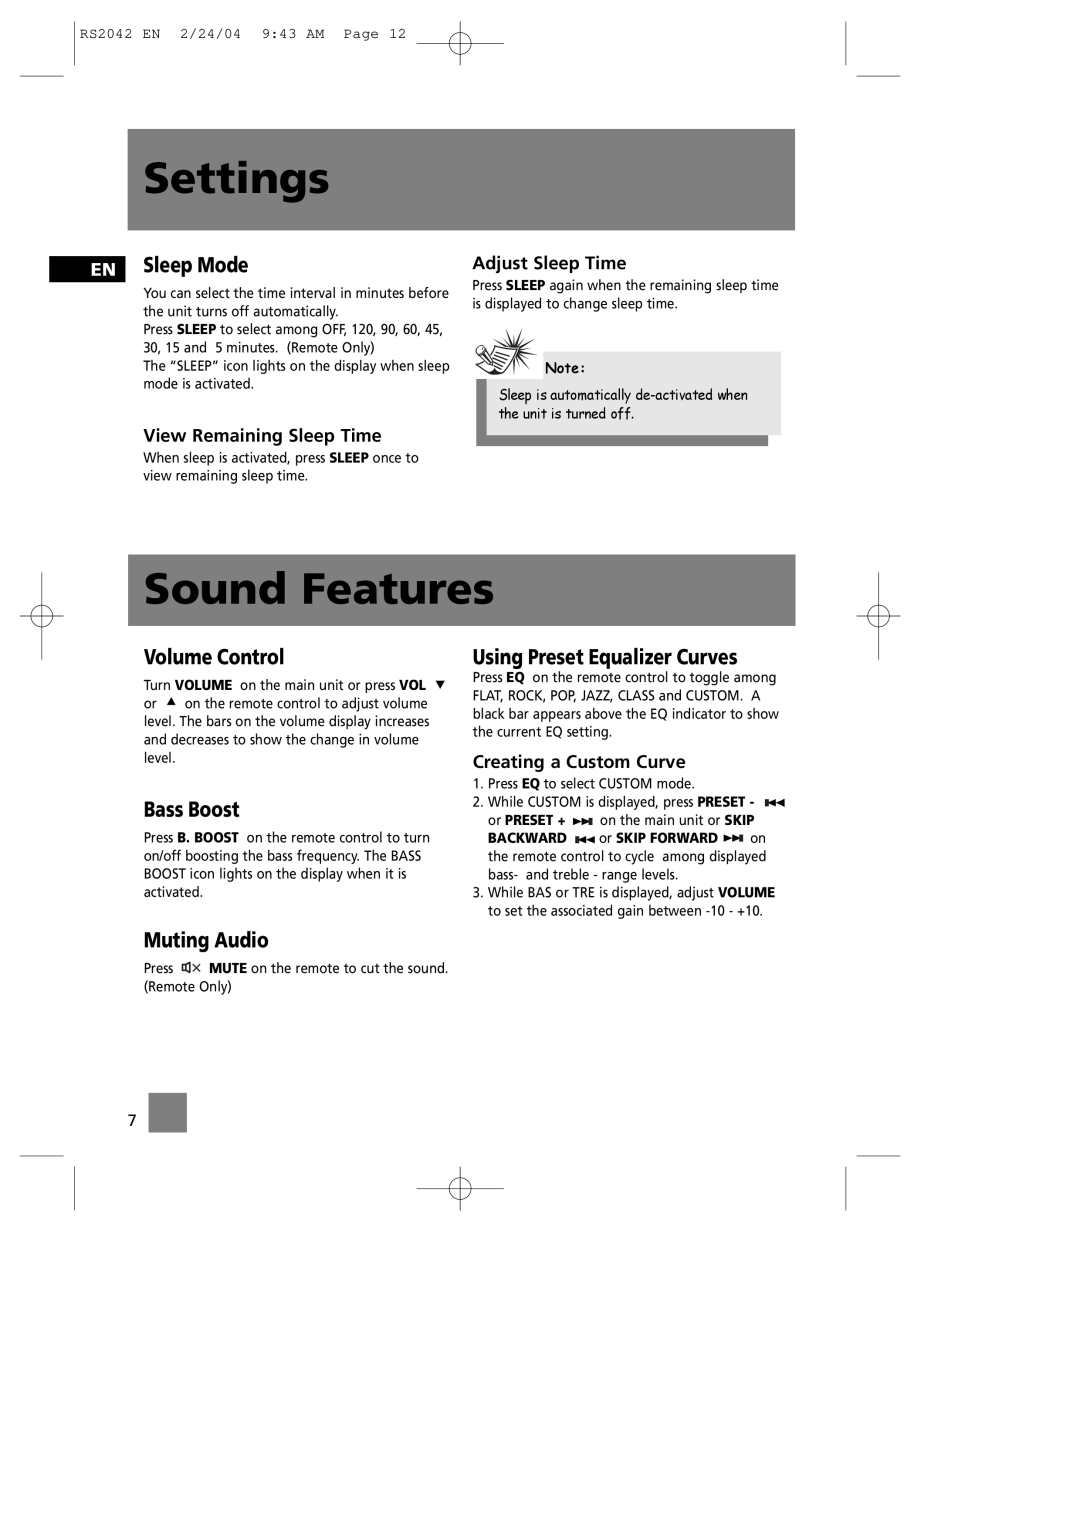 RCA RS2042 manual Sound Features, EN Sleep Mode, Volume Control, Bass Boost, Using Preset Equalizer Curves, Muting Audio 